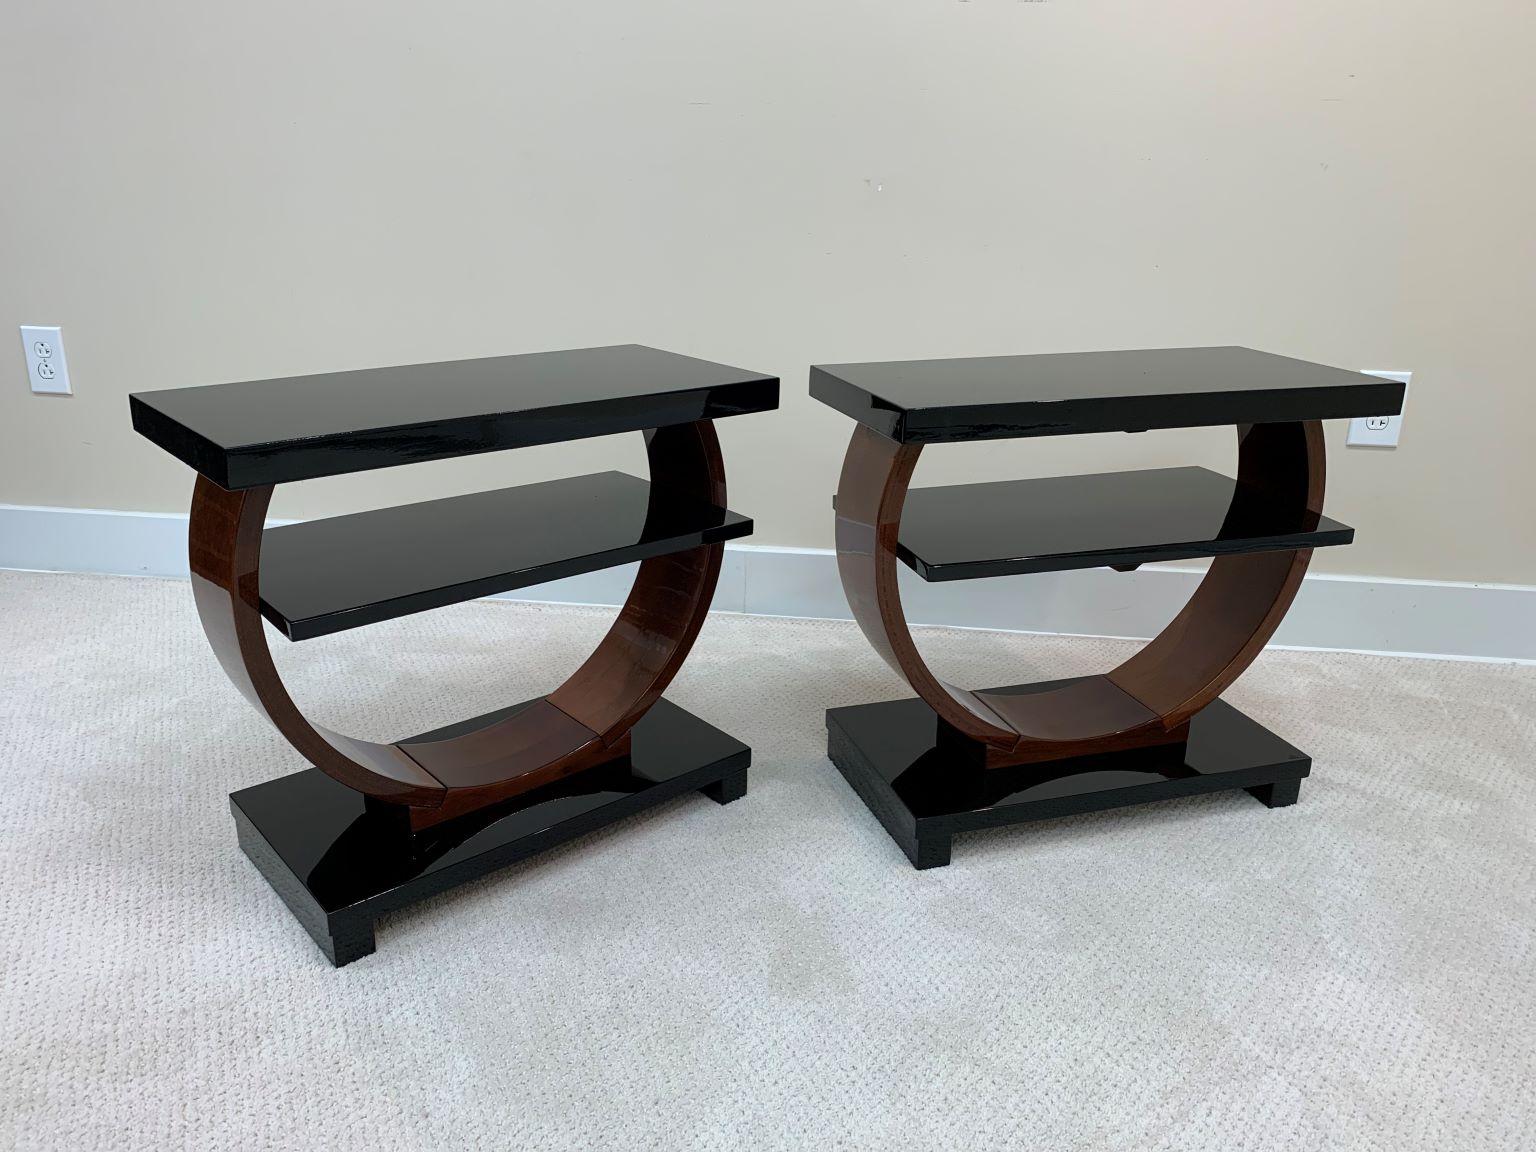 Maple Art Deco Machine Age End Tables by Modernage Furniture Company, Circa 1930's For Sale